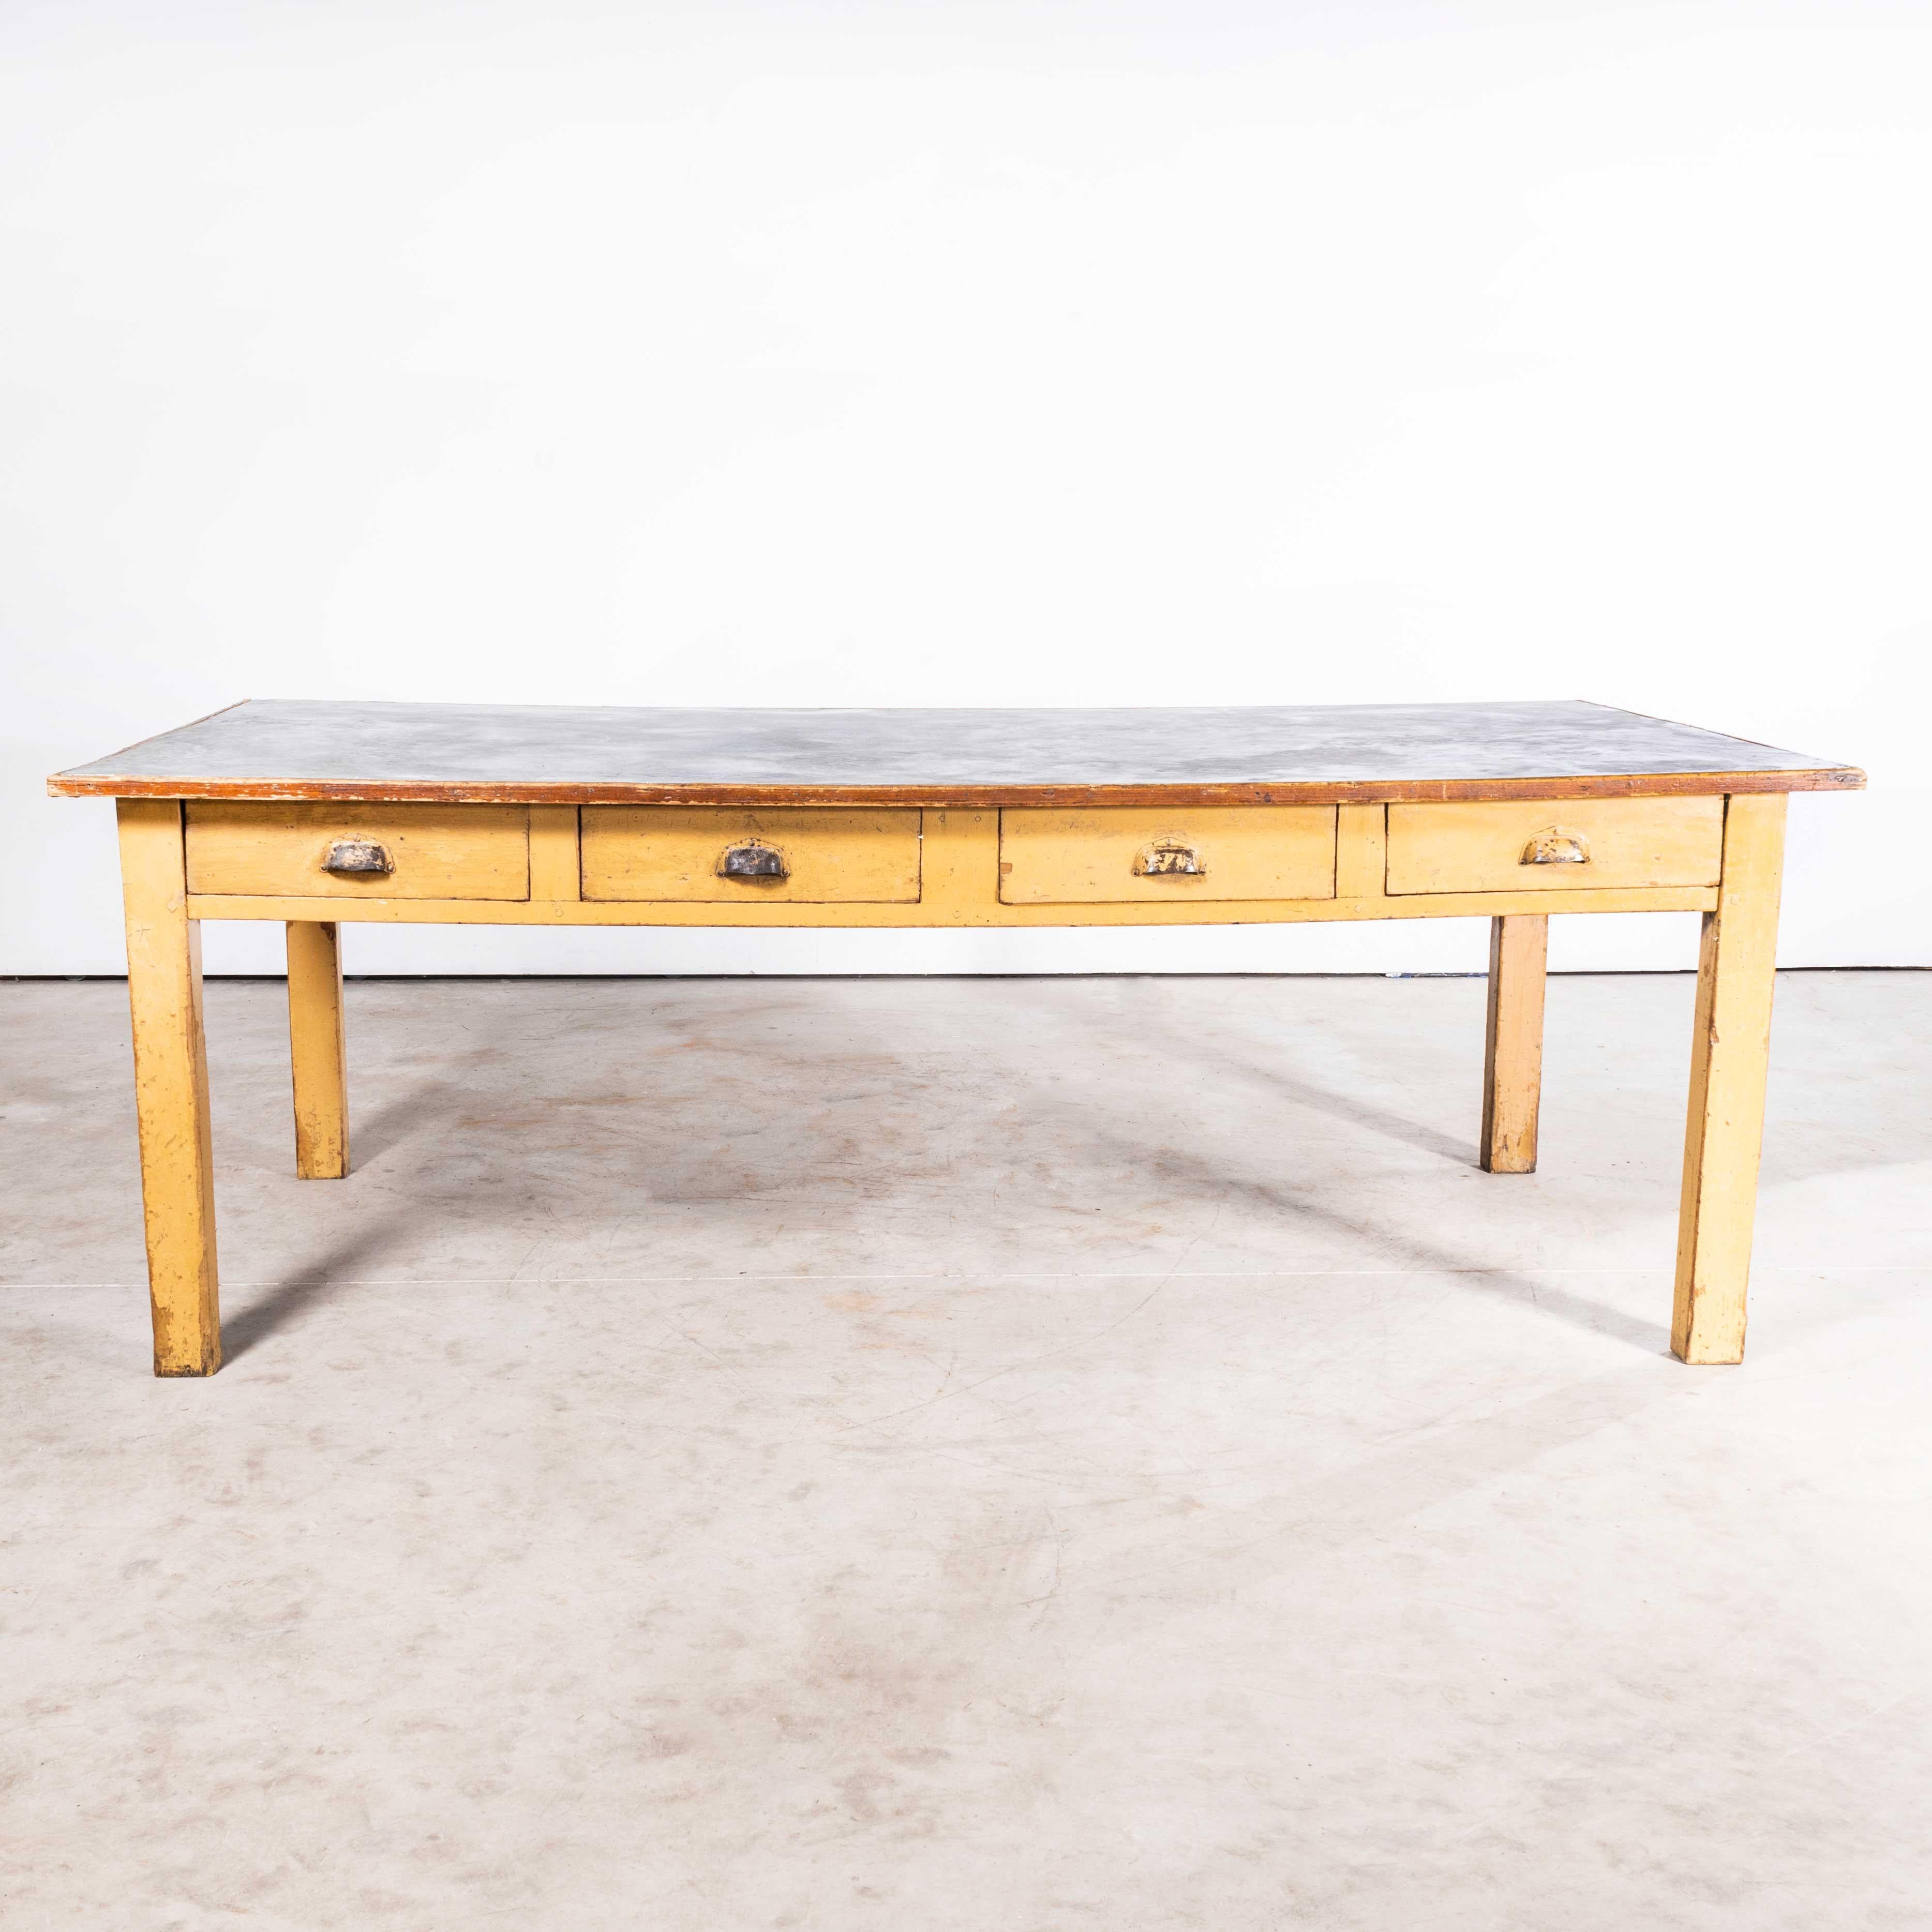 1950’s Large French Rectangular Zinc Top Dining Table
1950’s Large French Rectangular Zinc Top Dining Table. Unusual and practical French zinc top dining table with eight drawers. The table base is strong and stable, made from solid beech throughout